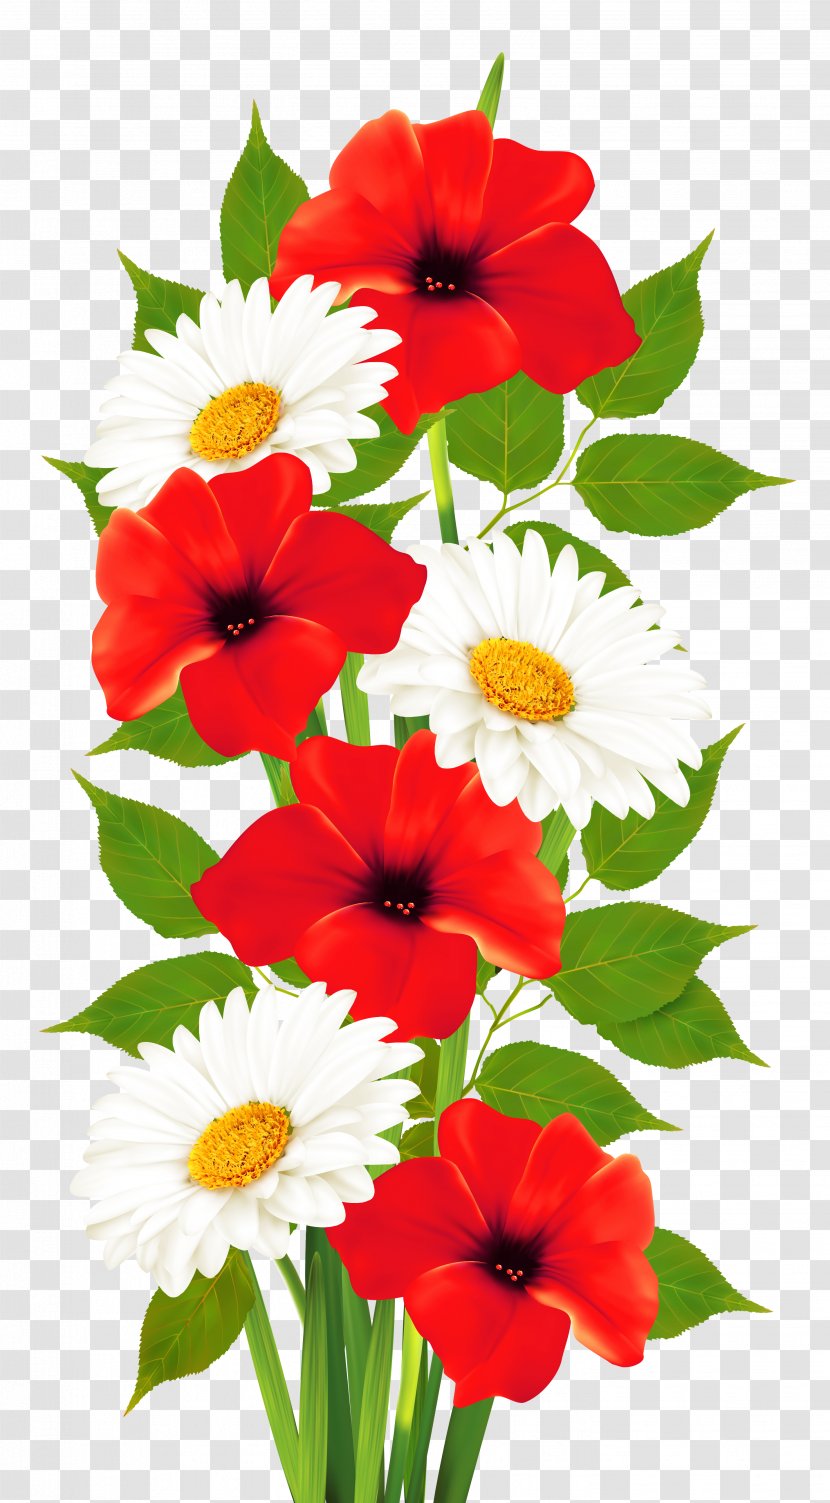 Flower Clip Art - Flowering Plant - Poppies And Daisies Transparent Clipart Transparent PNG